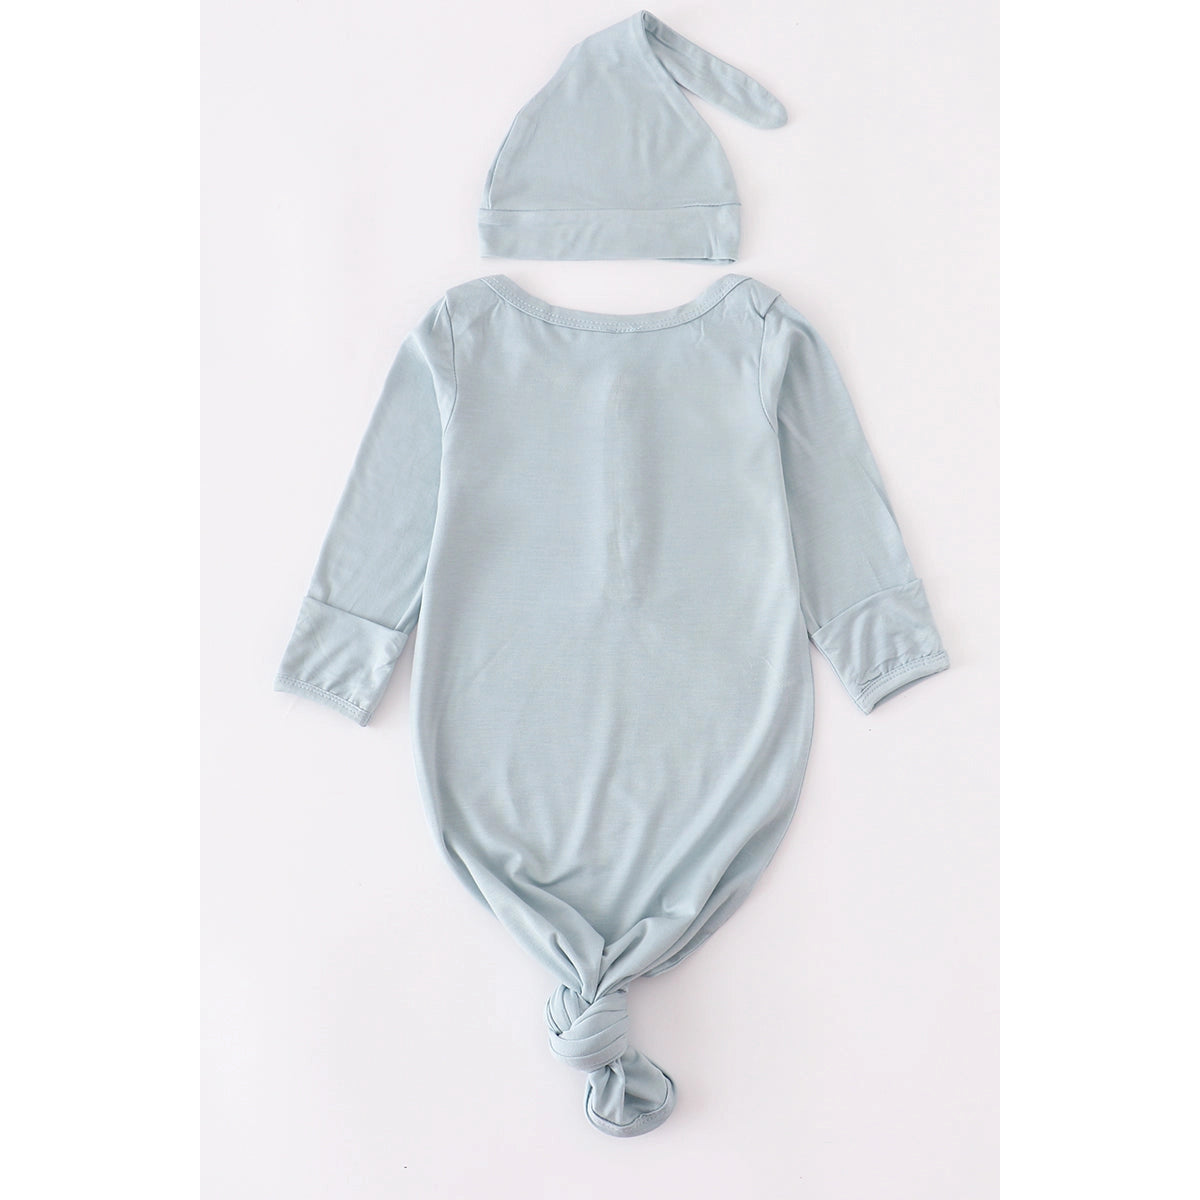 Knotted Baby Gown Set- Sea Breeze